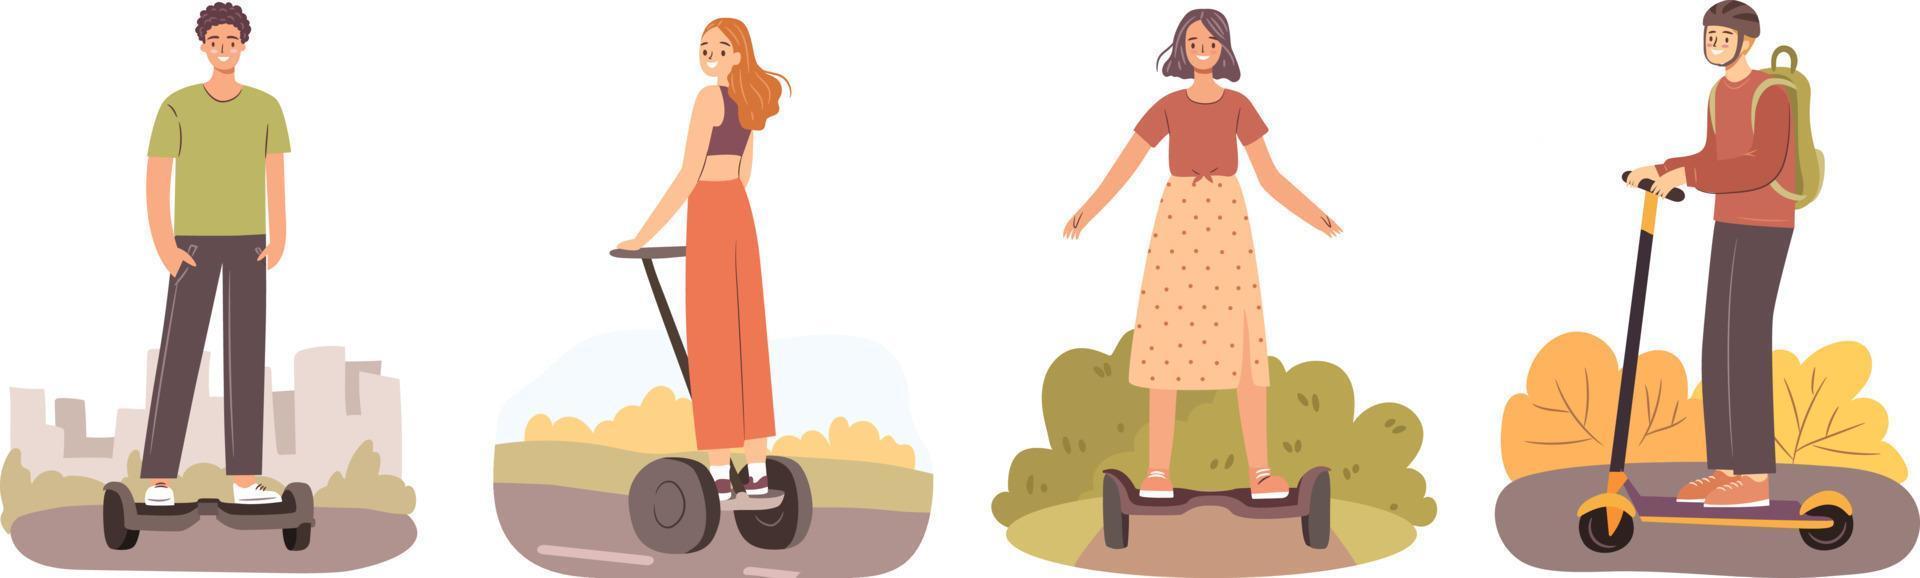 People on electro transport set. Happy girls and guys riding individual urban vehicles. Flat vector illustration